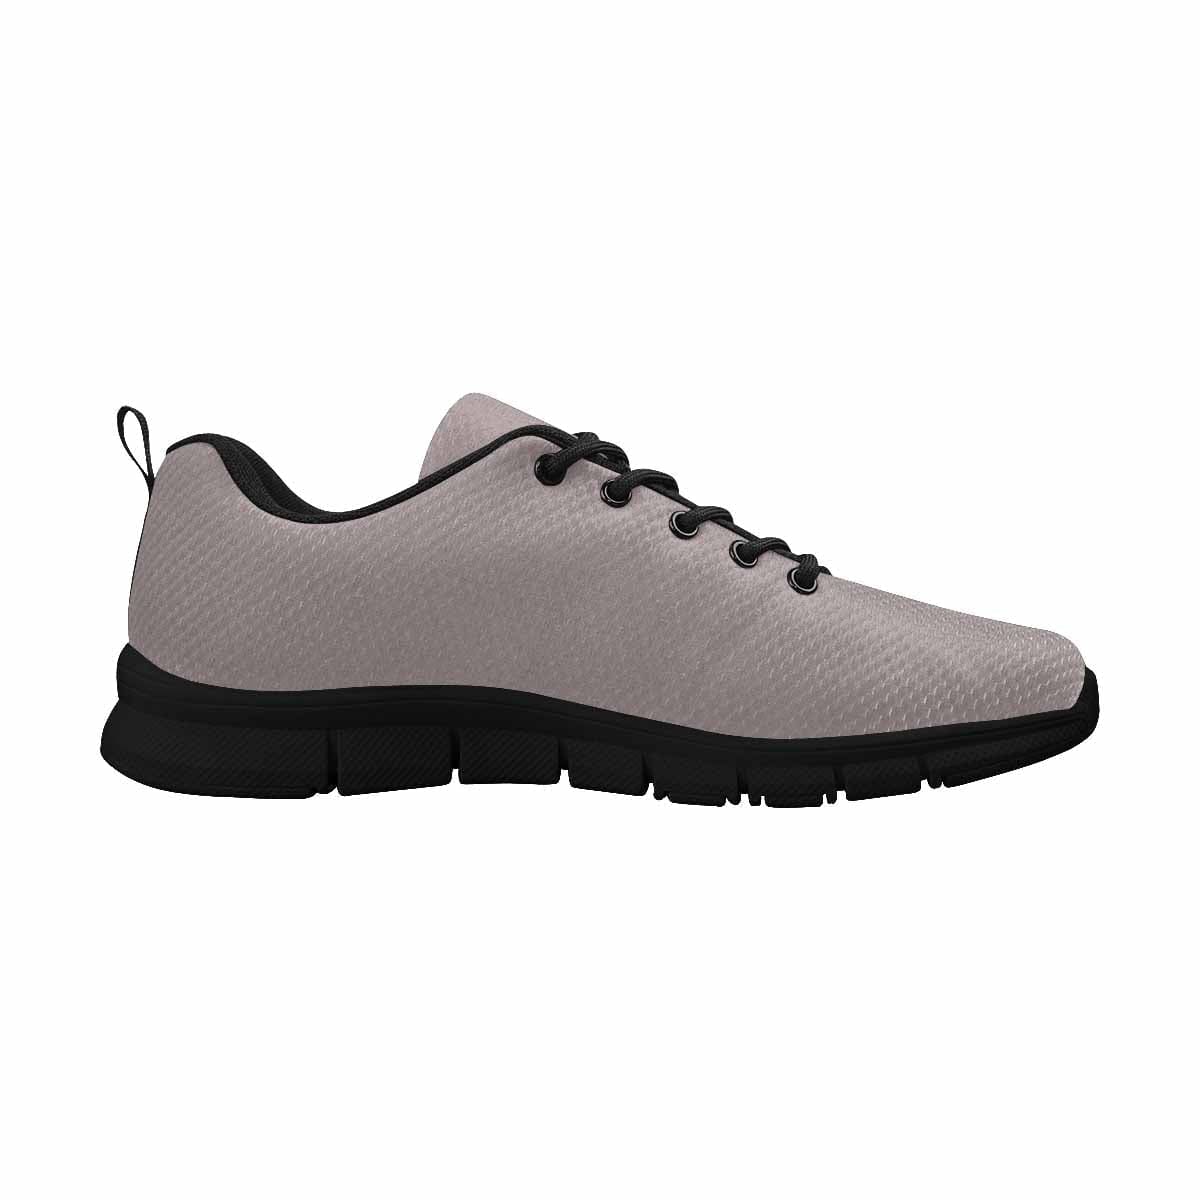 Sneakers For Men Coffee Brown - Canvas Mesh Athletic Running Shoes - Mens